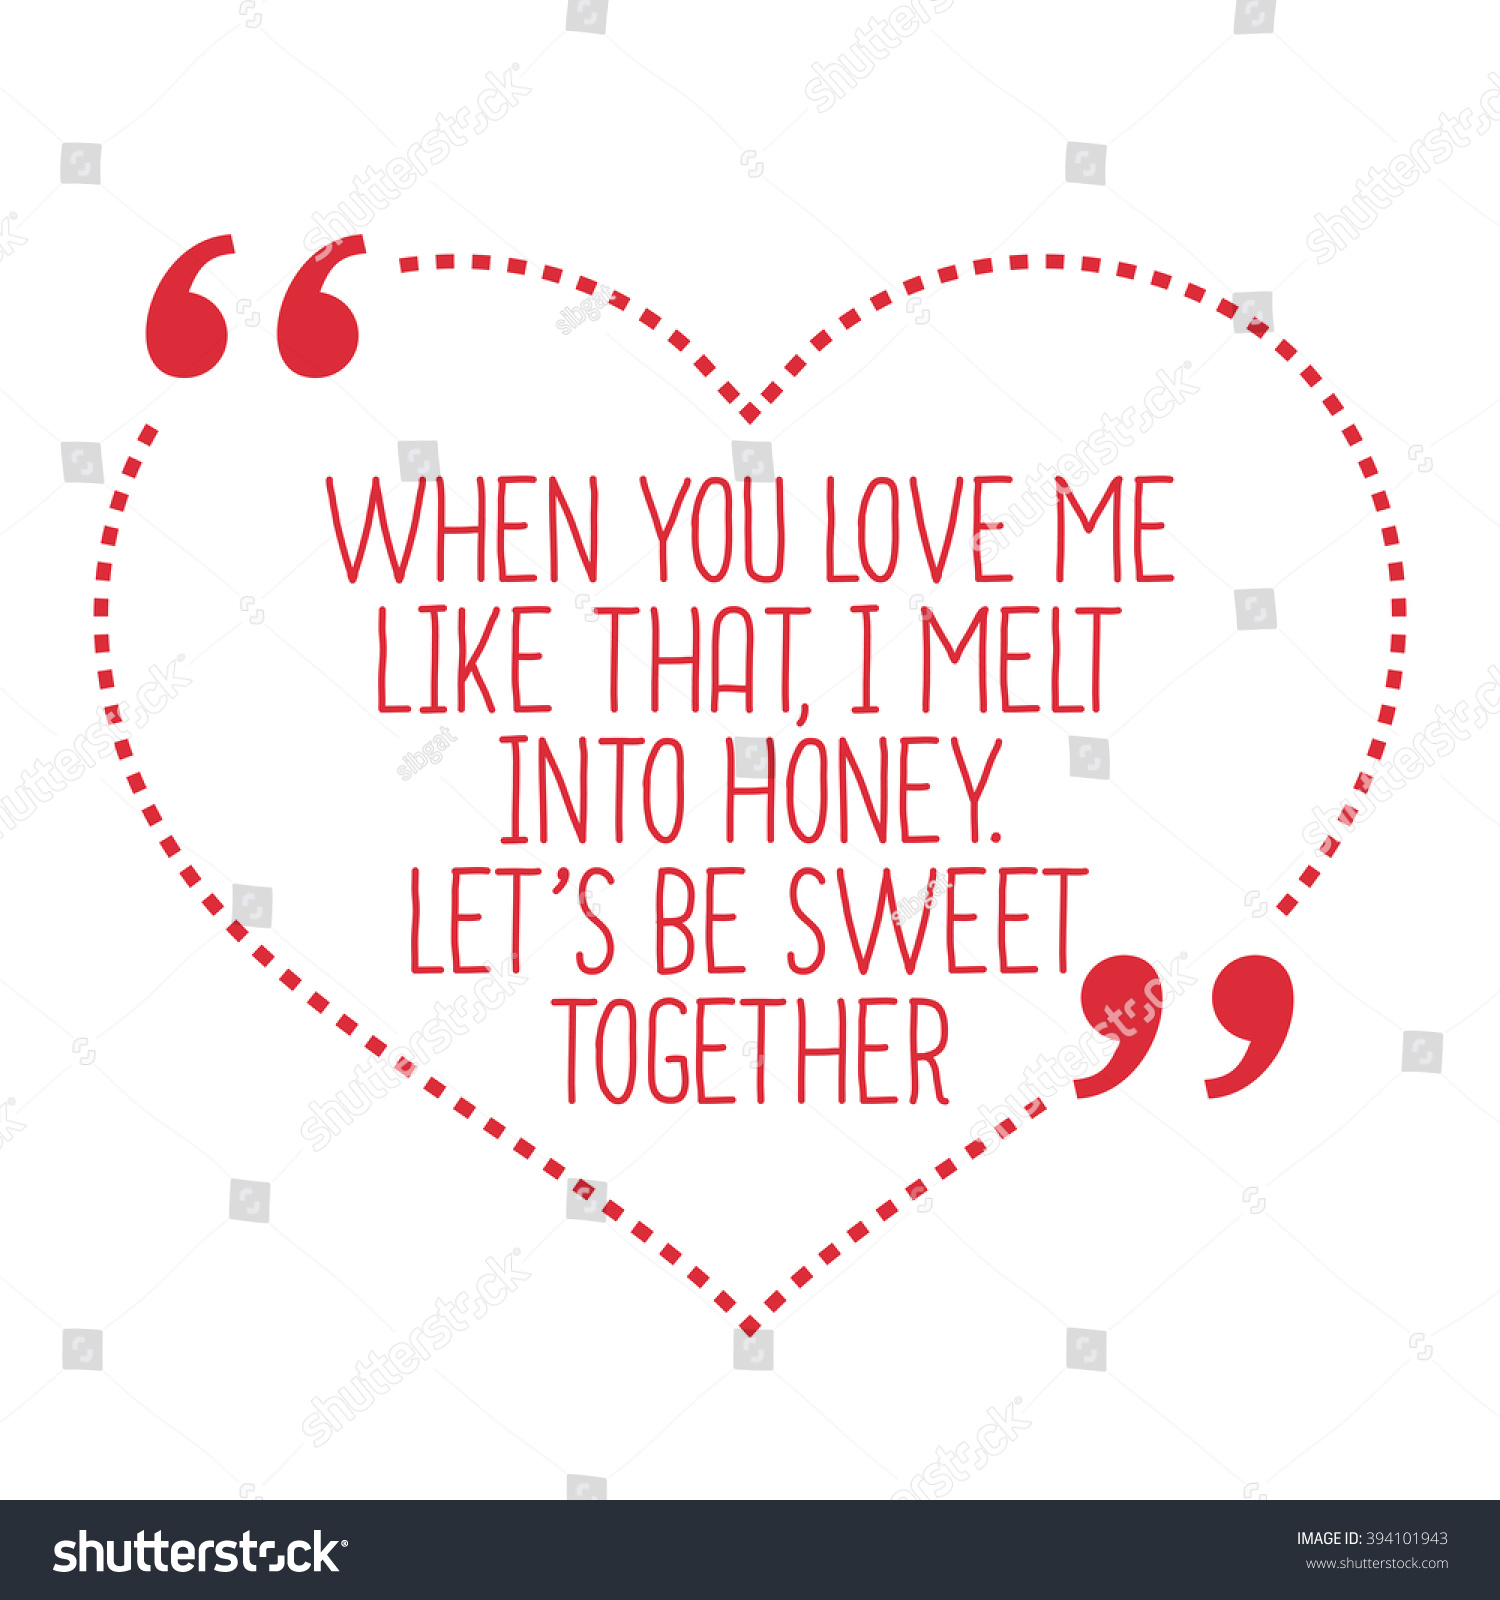 Funny love quote When you love me like that I melt into honey